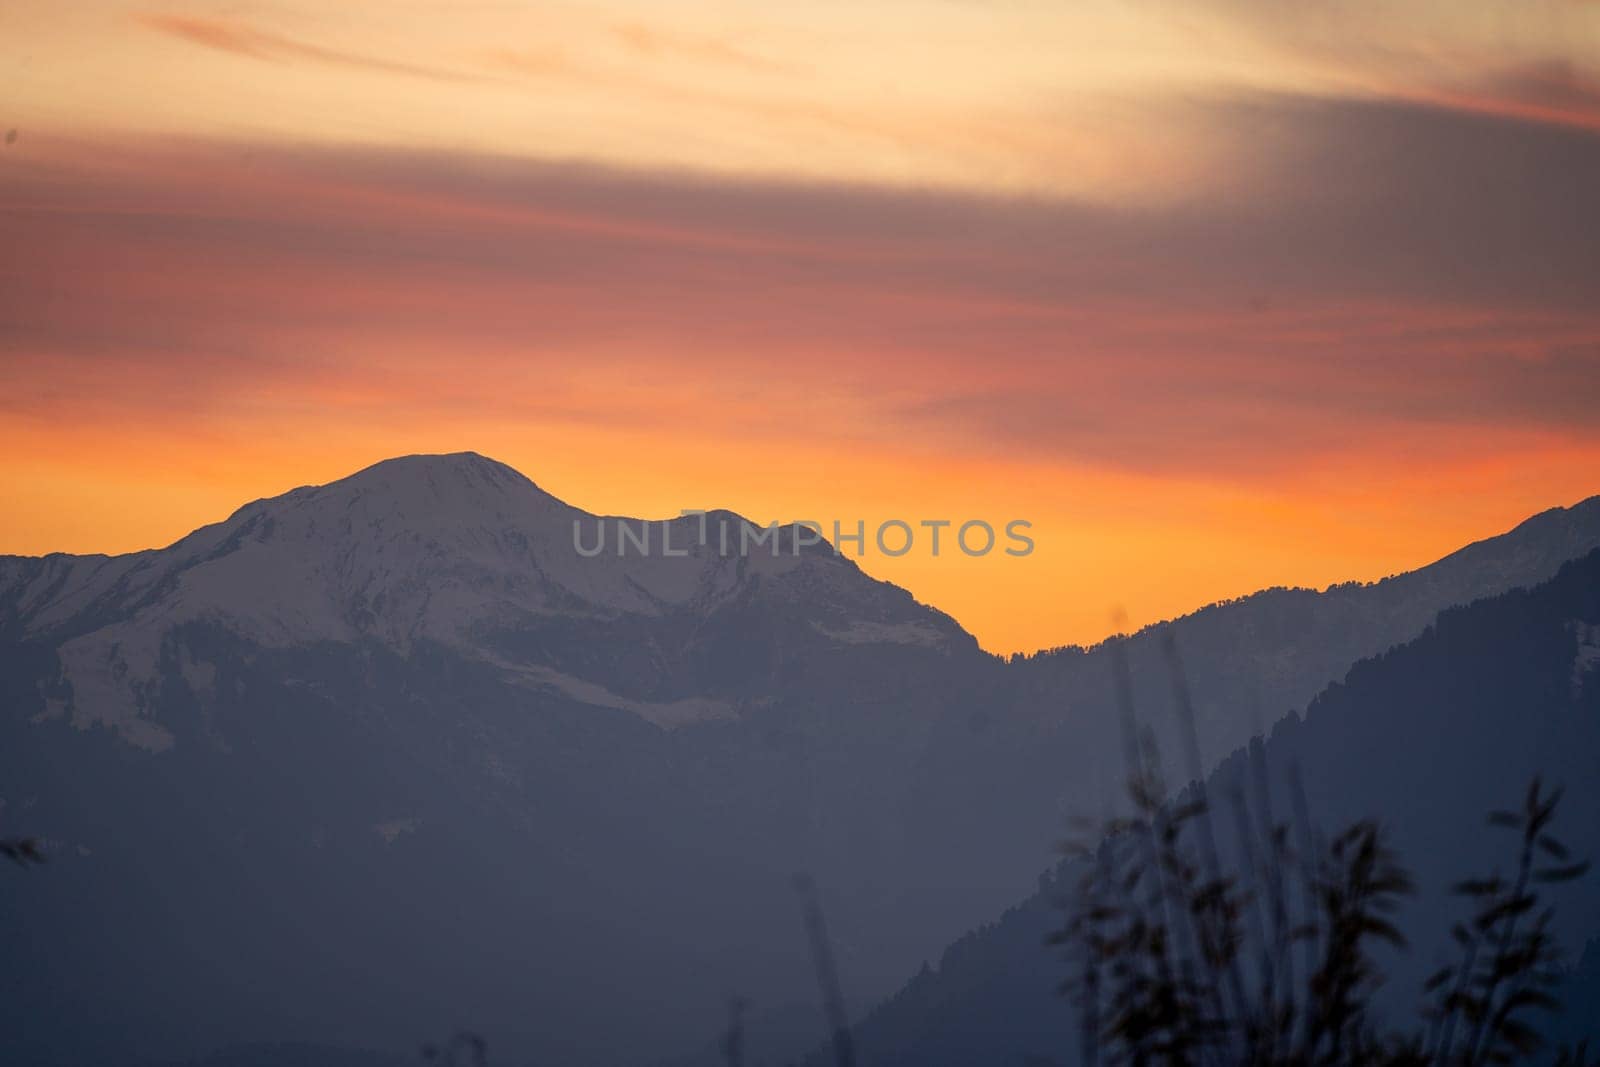 Sunrise sunset dusk dawn colors over the himalaya mountains with fog haze in distance with rich orange and red colors in manali kullu shimla by Shalinimathur